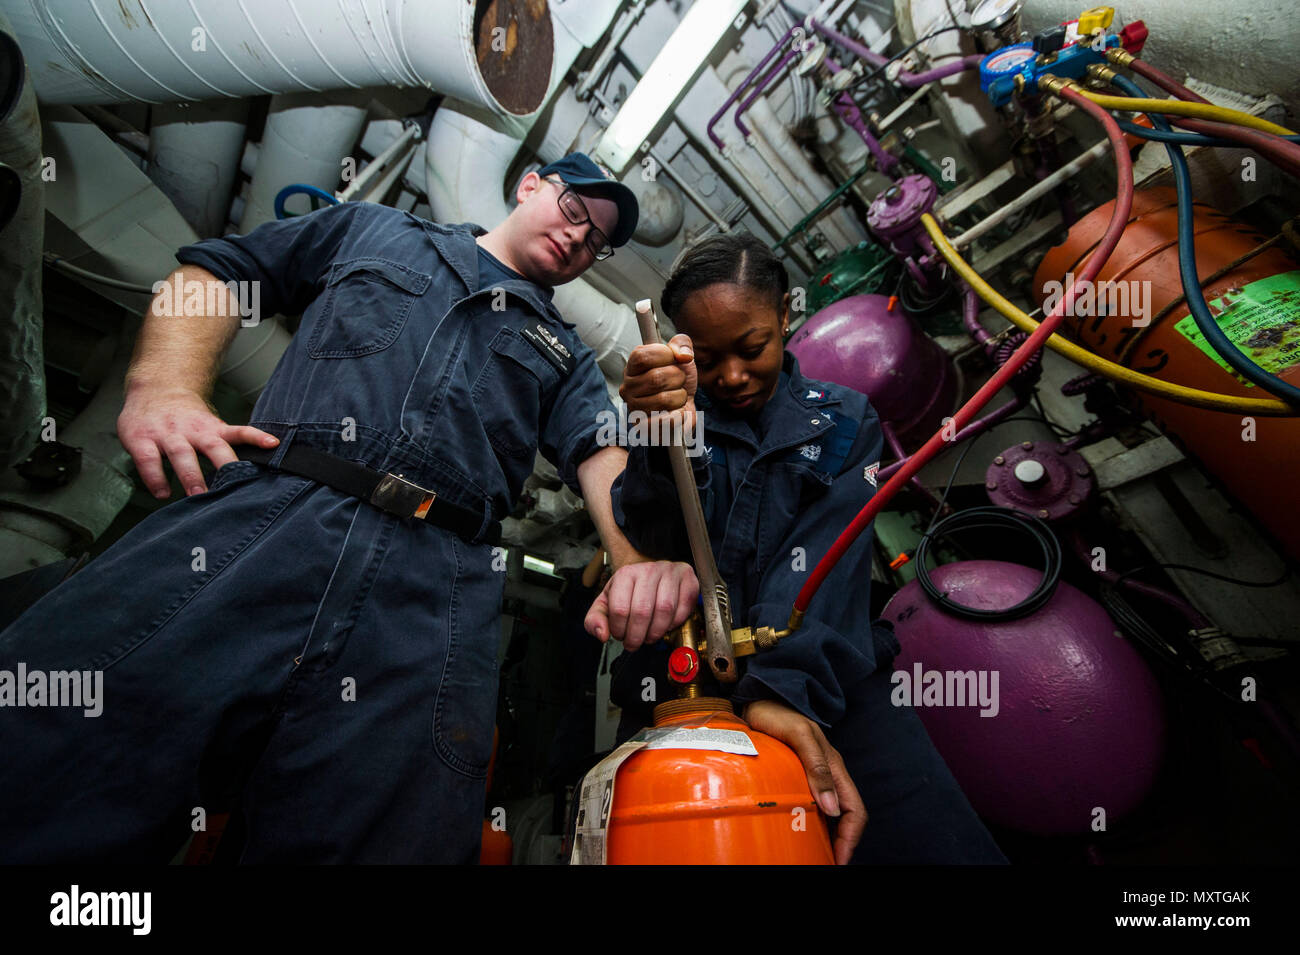 161205-N-IV489-048 ATLANTIC OCEAN (Dec. 5, 2016) Petty Officer 3rd Class Learneice Ussery, right, from Macon, Georgia, uses a crescent wrench to charge a refrigerant to the reefer system aboard the aircraft carrier USS George Washington (CVN 73). George Washington, homeported in Norfolk, is underway conducting carrier qualifications in the Atlantic Ocean. (U.S. Navy Photo by Seaman Oscar Albert Moreno Jr.) Stock Photo